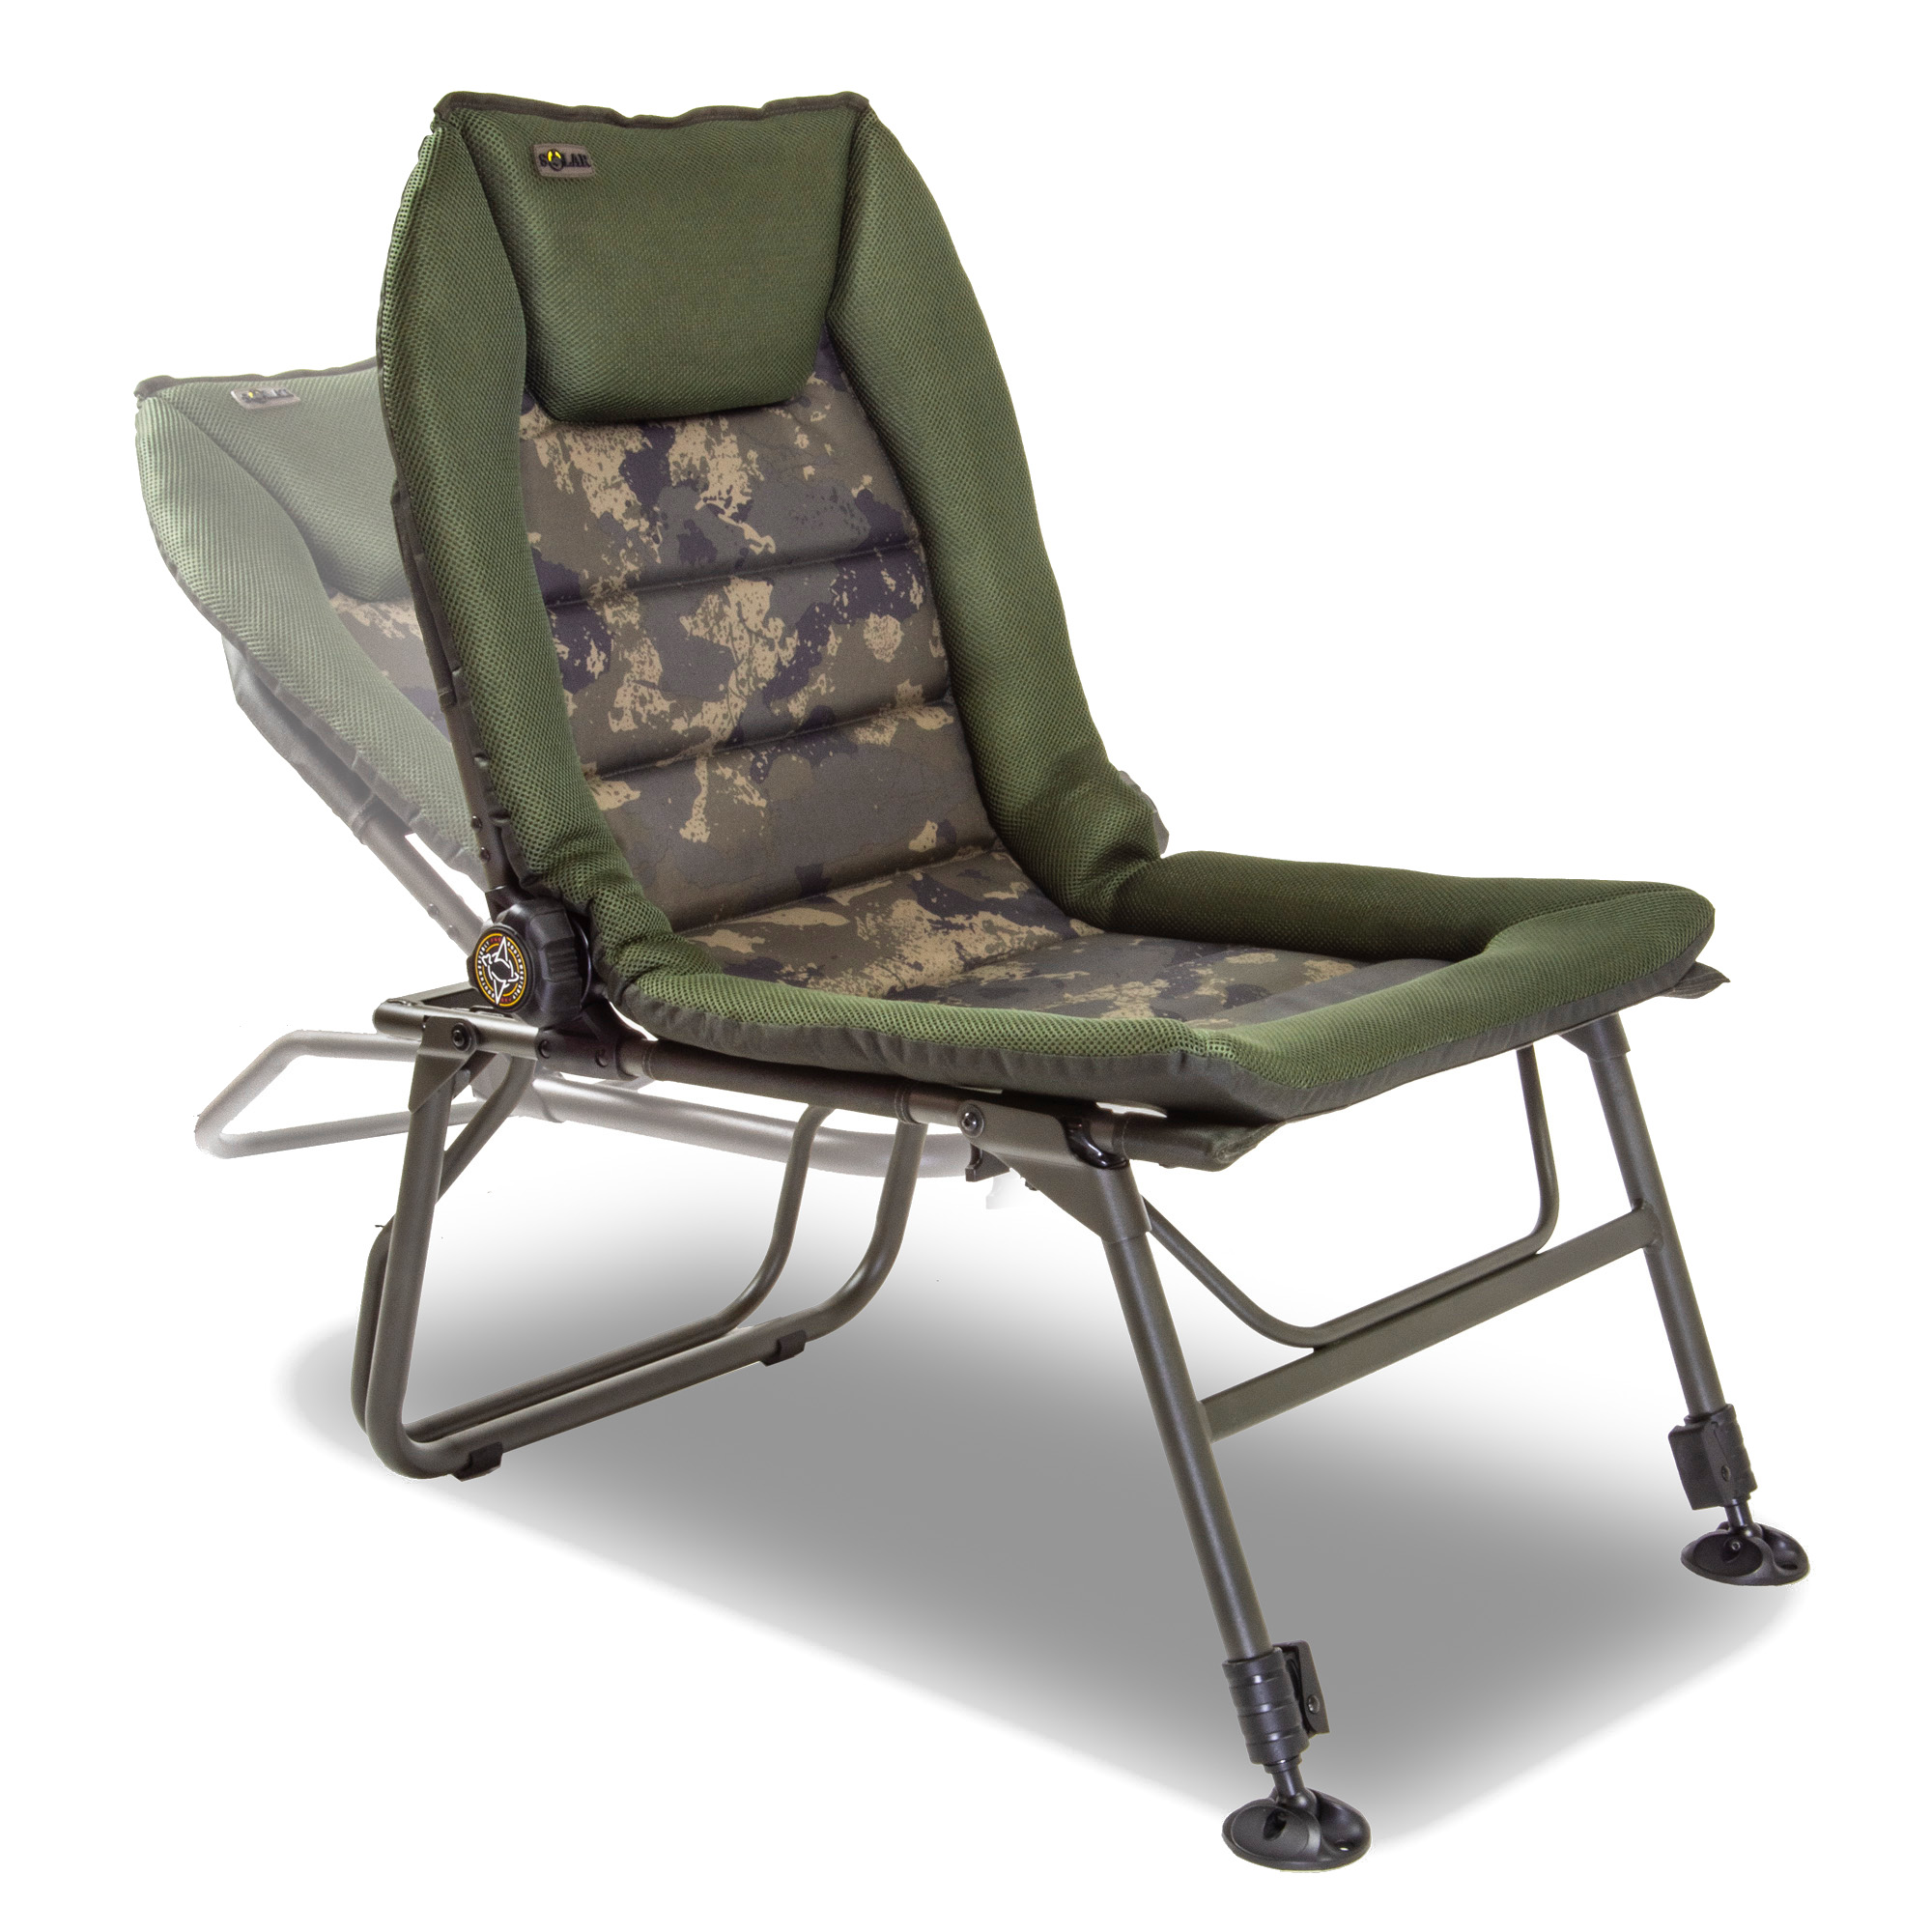 Solar South Westerly Pro Combi Chair Silla para Carpa (Bed-Fit & Recline)